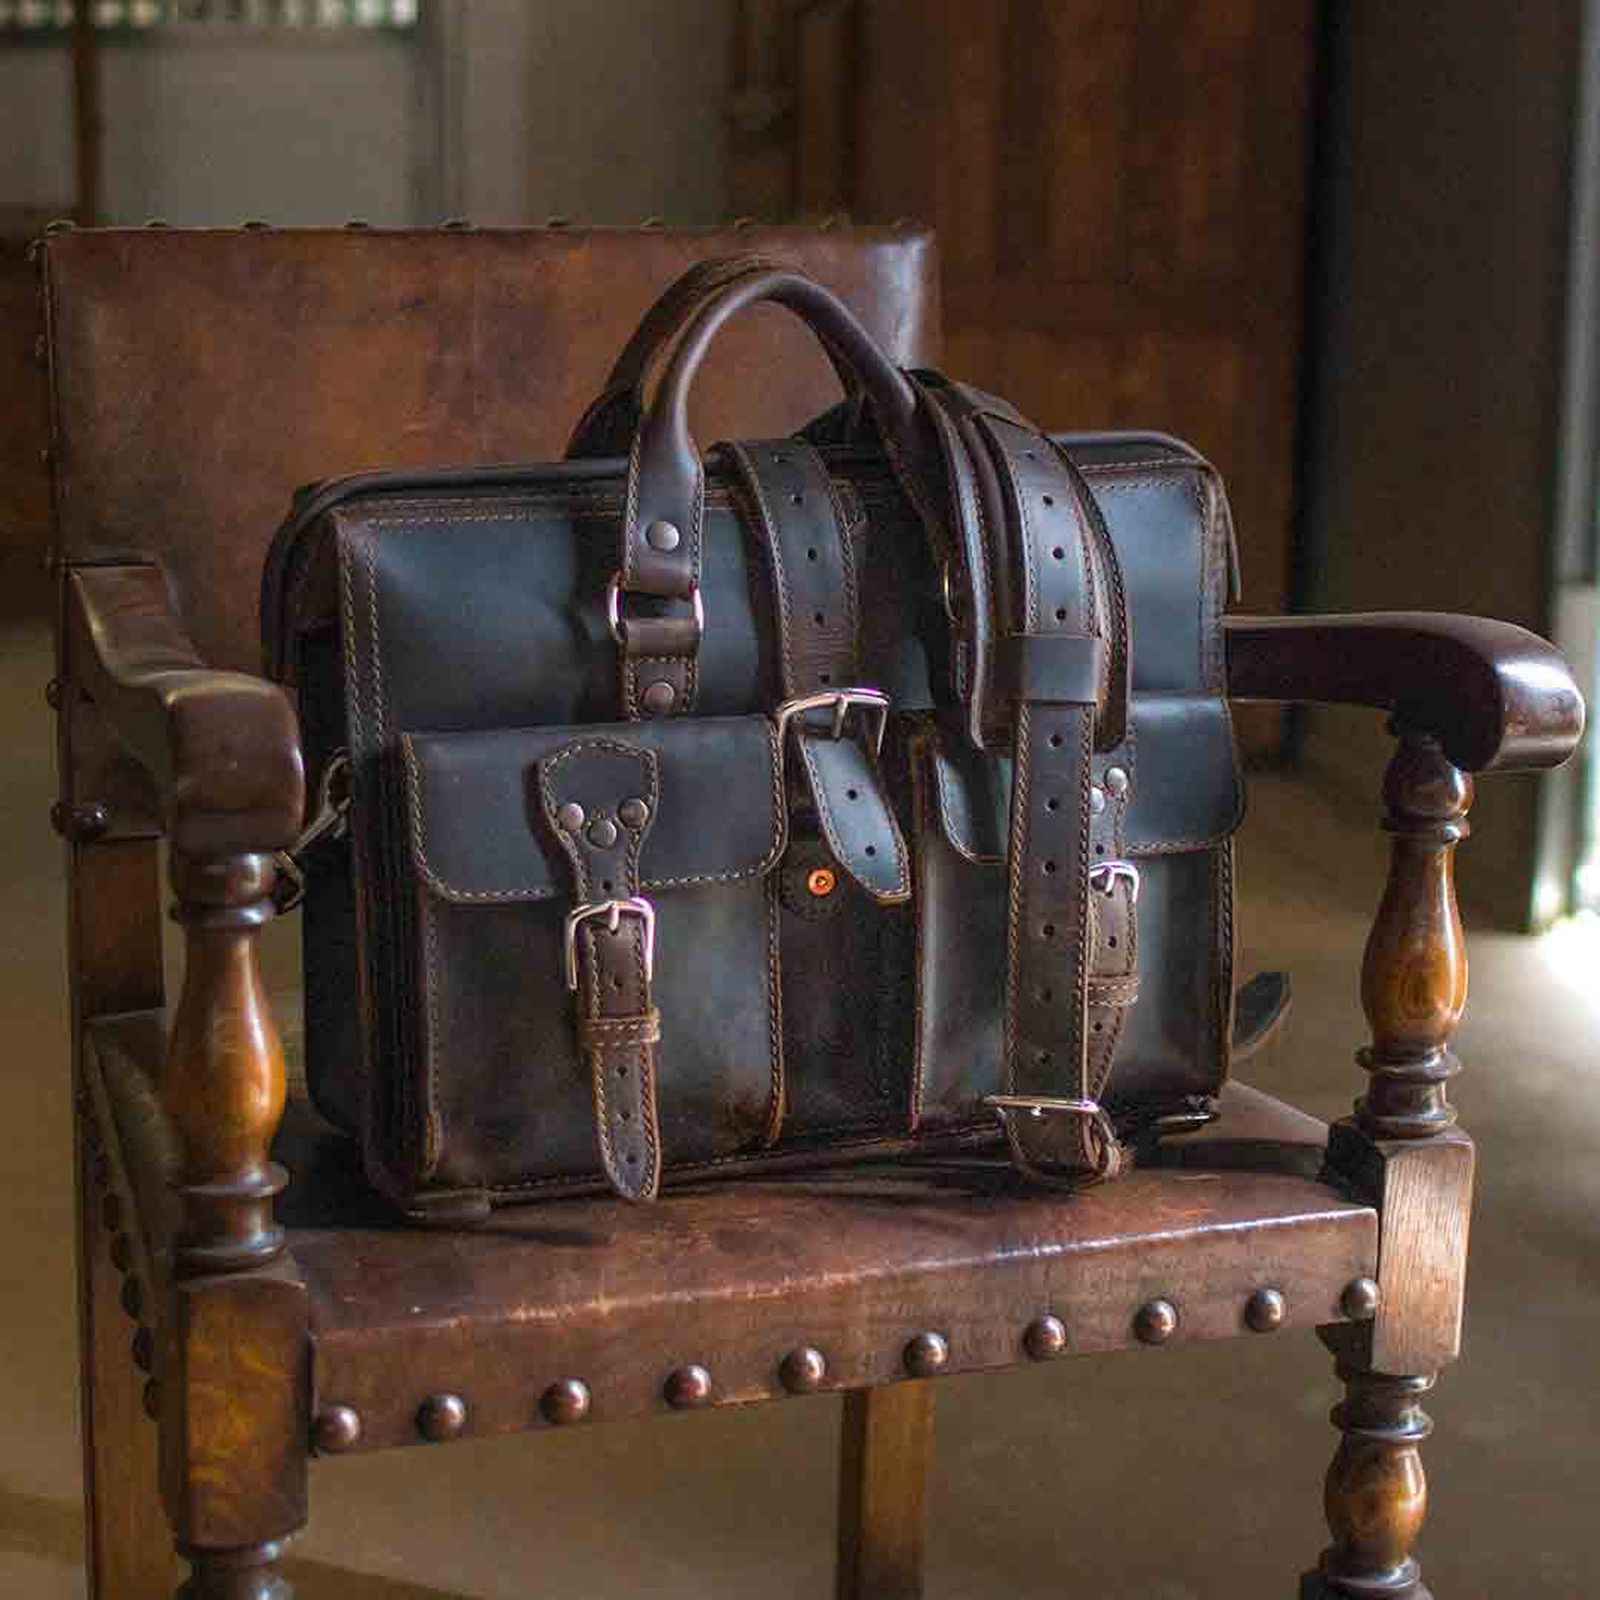 MacRumors Giveaway: Win a Flight Bag Leather Briefcase and Accessories From Saddleback Leather Co.